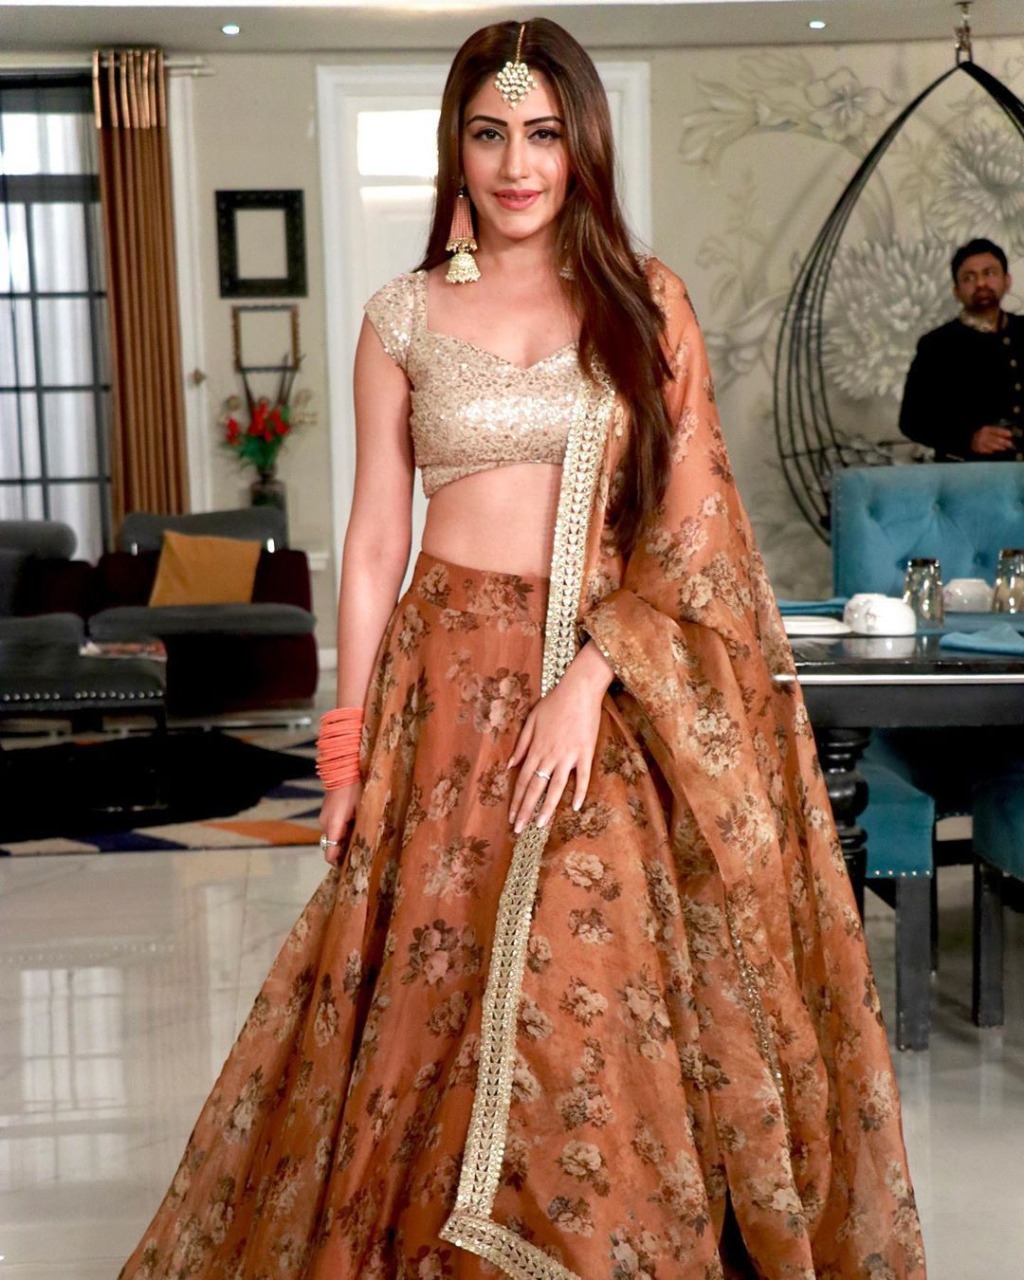 2021 Wedding Lehengas Trend is All About Embracing Earthy Tones - Wish N Wed